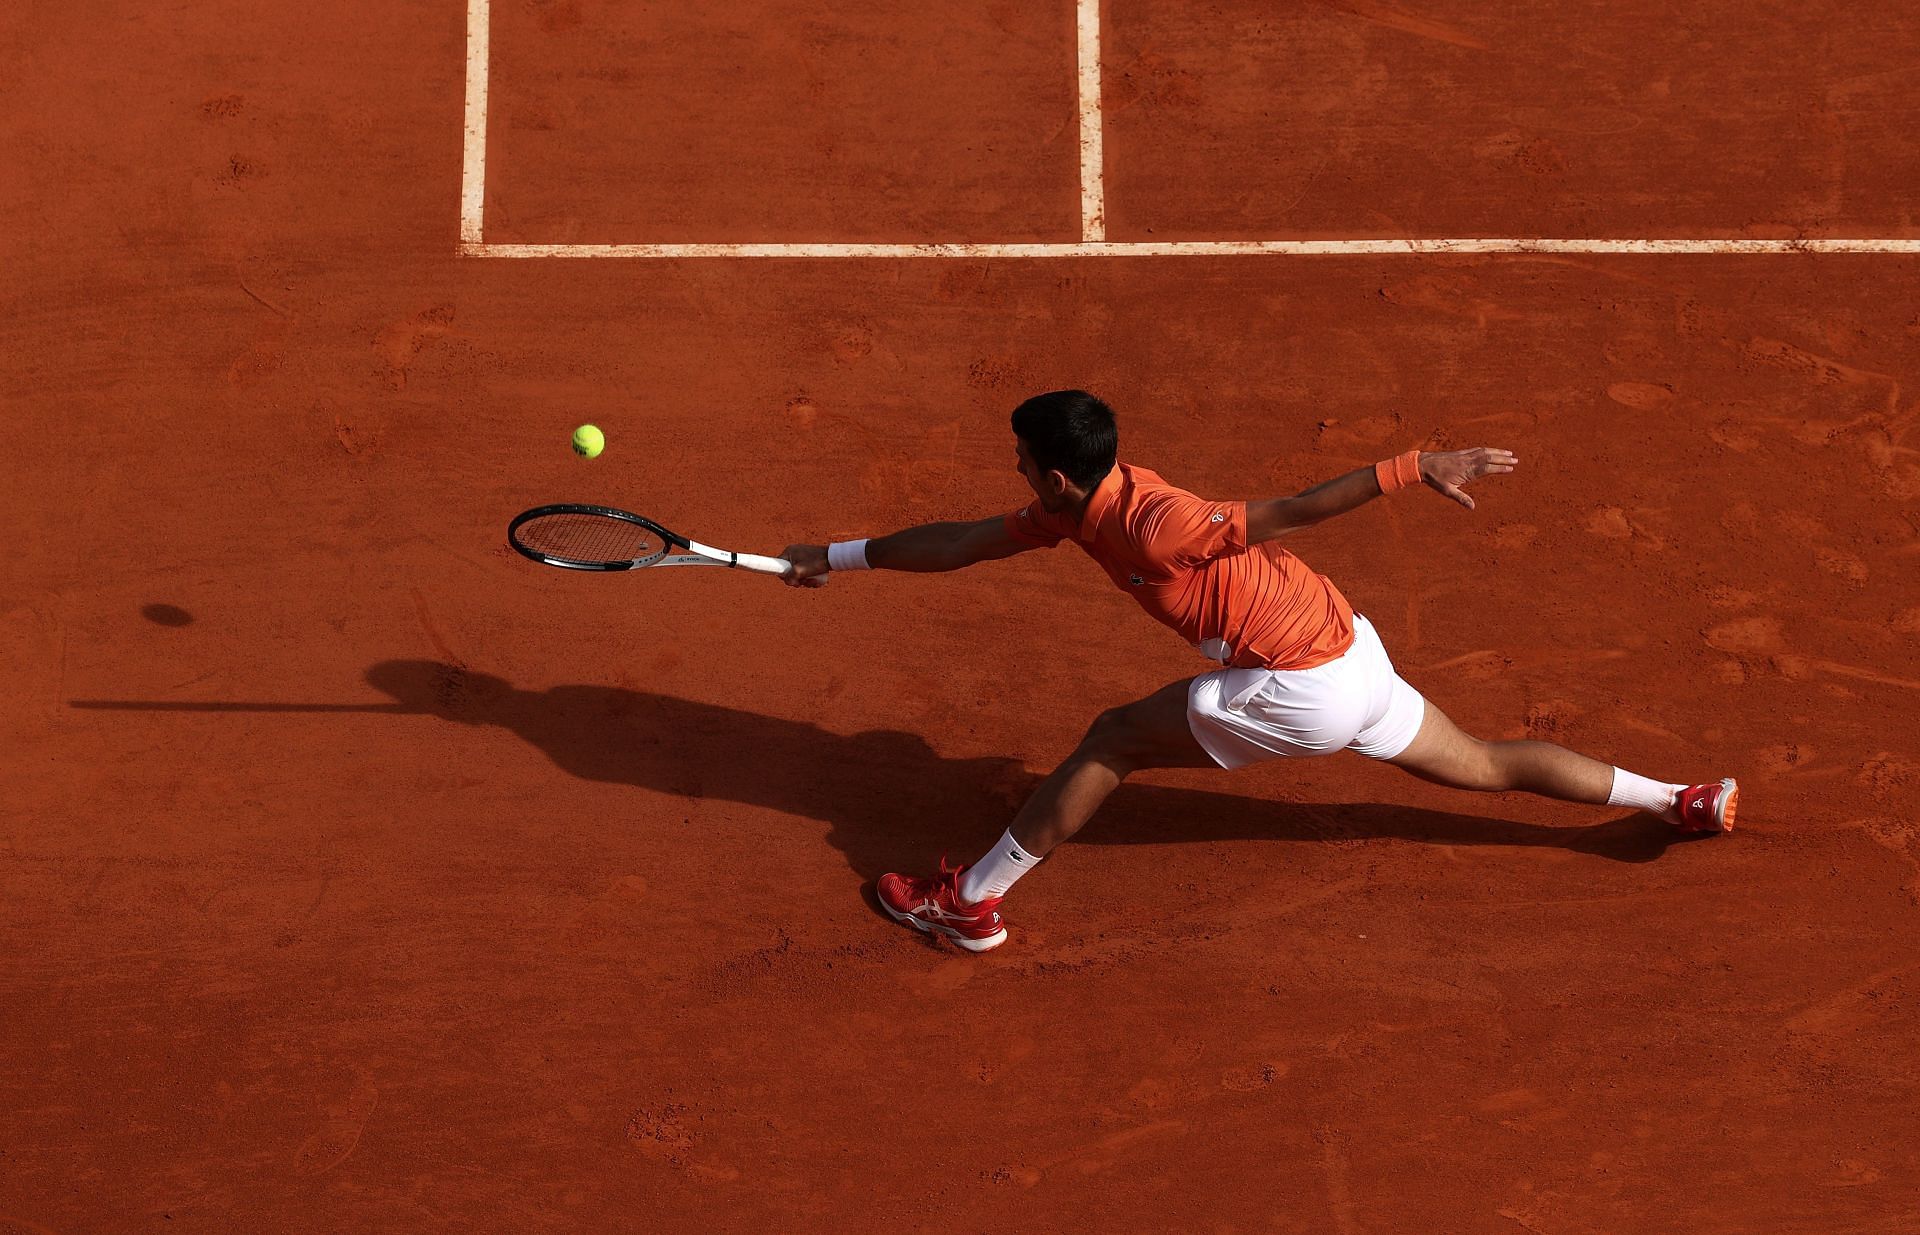 Novak Djokovic in action at the Serbia Open.